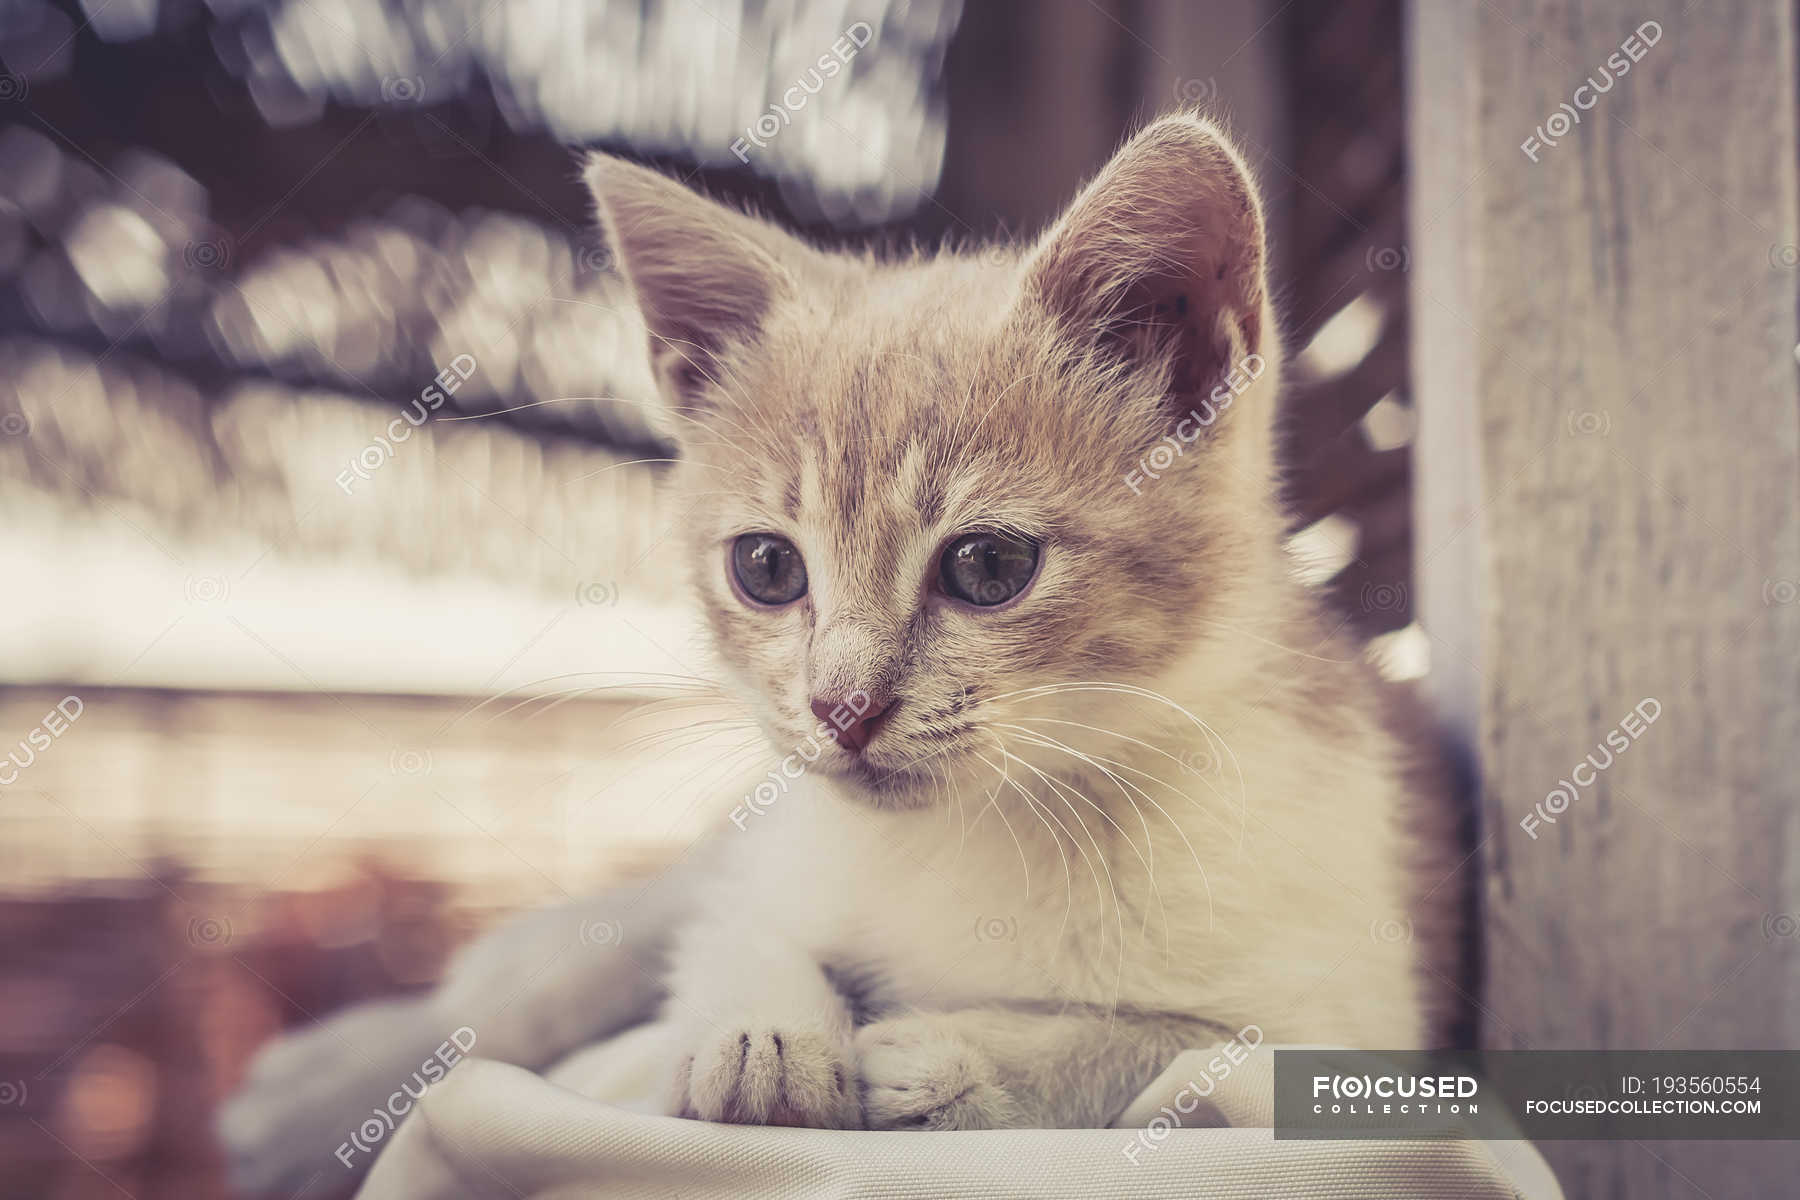 Close Up Of Cute Adorable Kitten Blurred Background Looking At Camera Domestic Animal Stock Photo 193560554